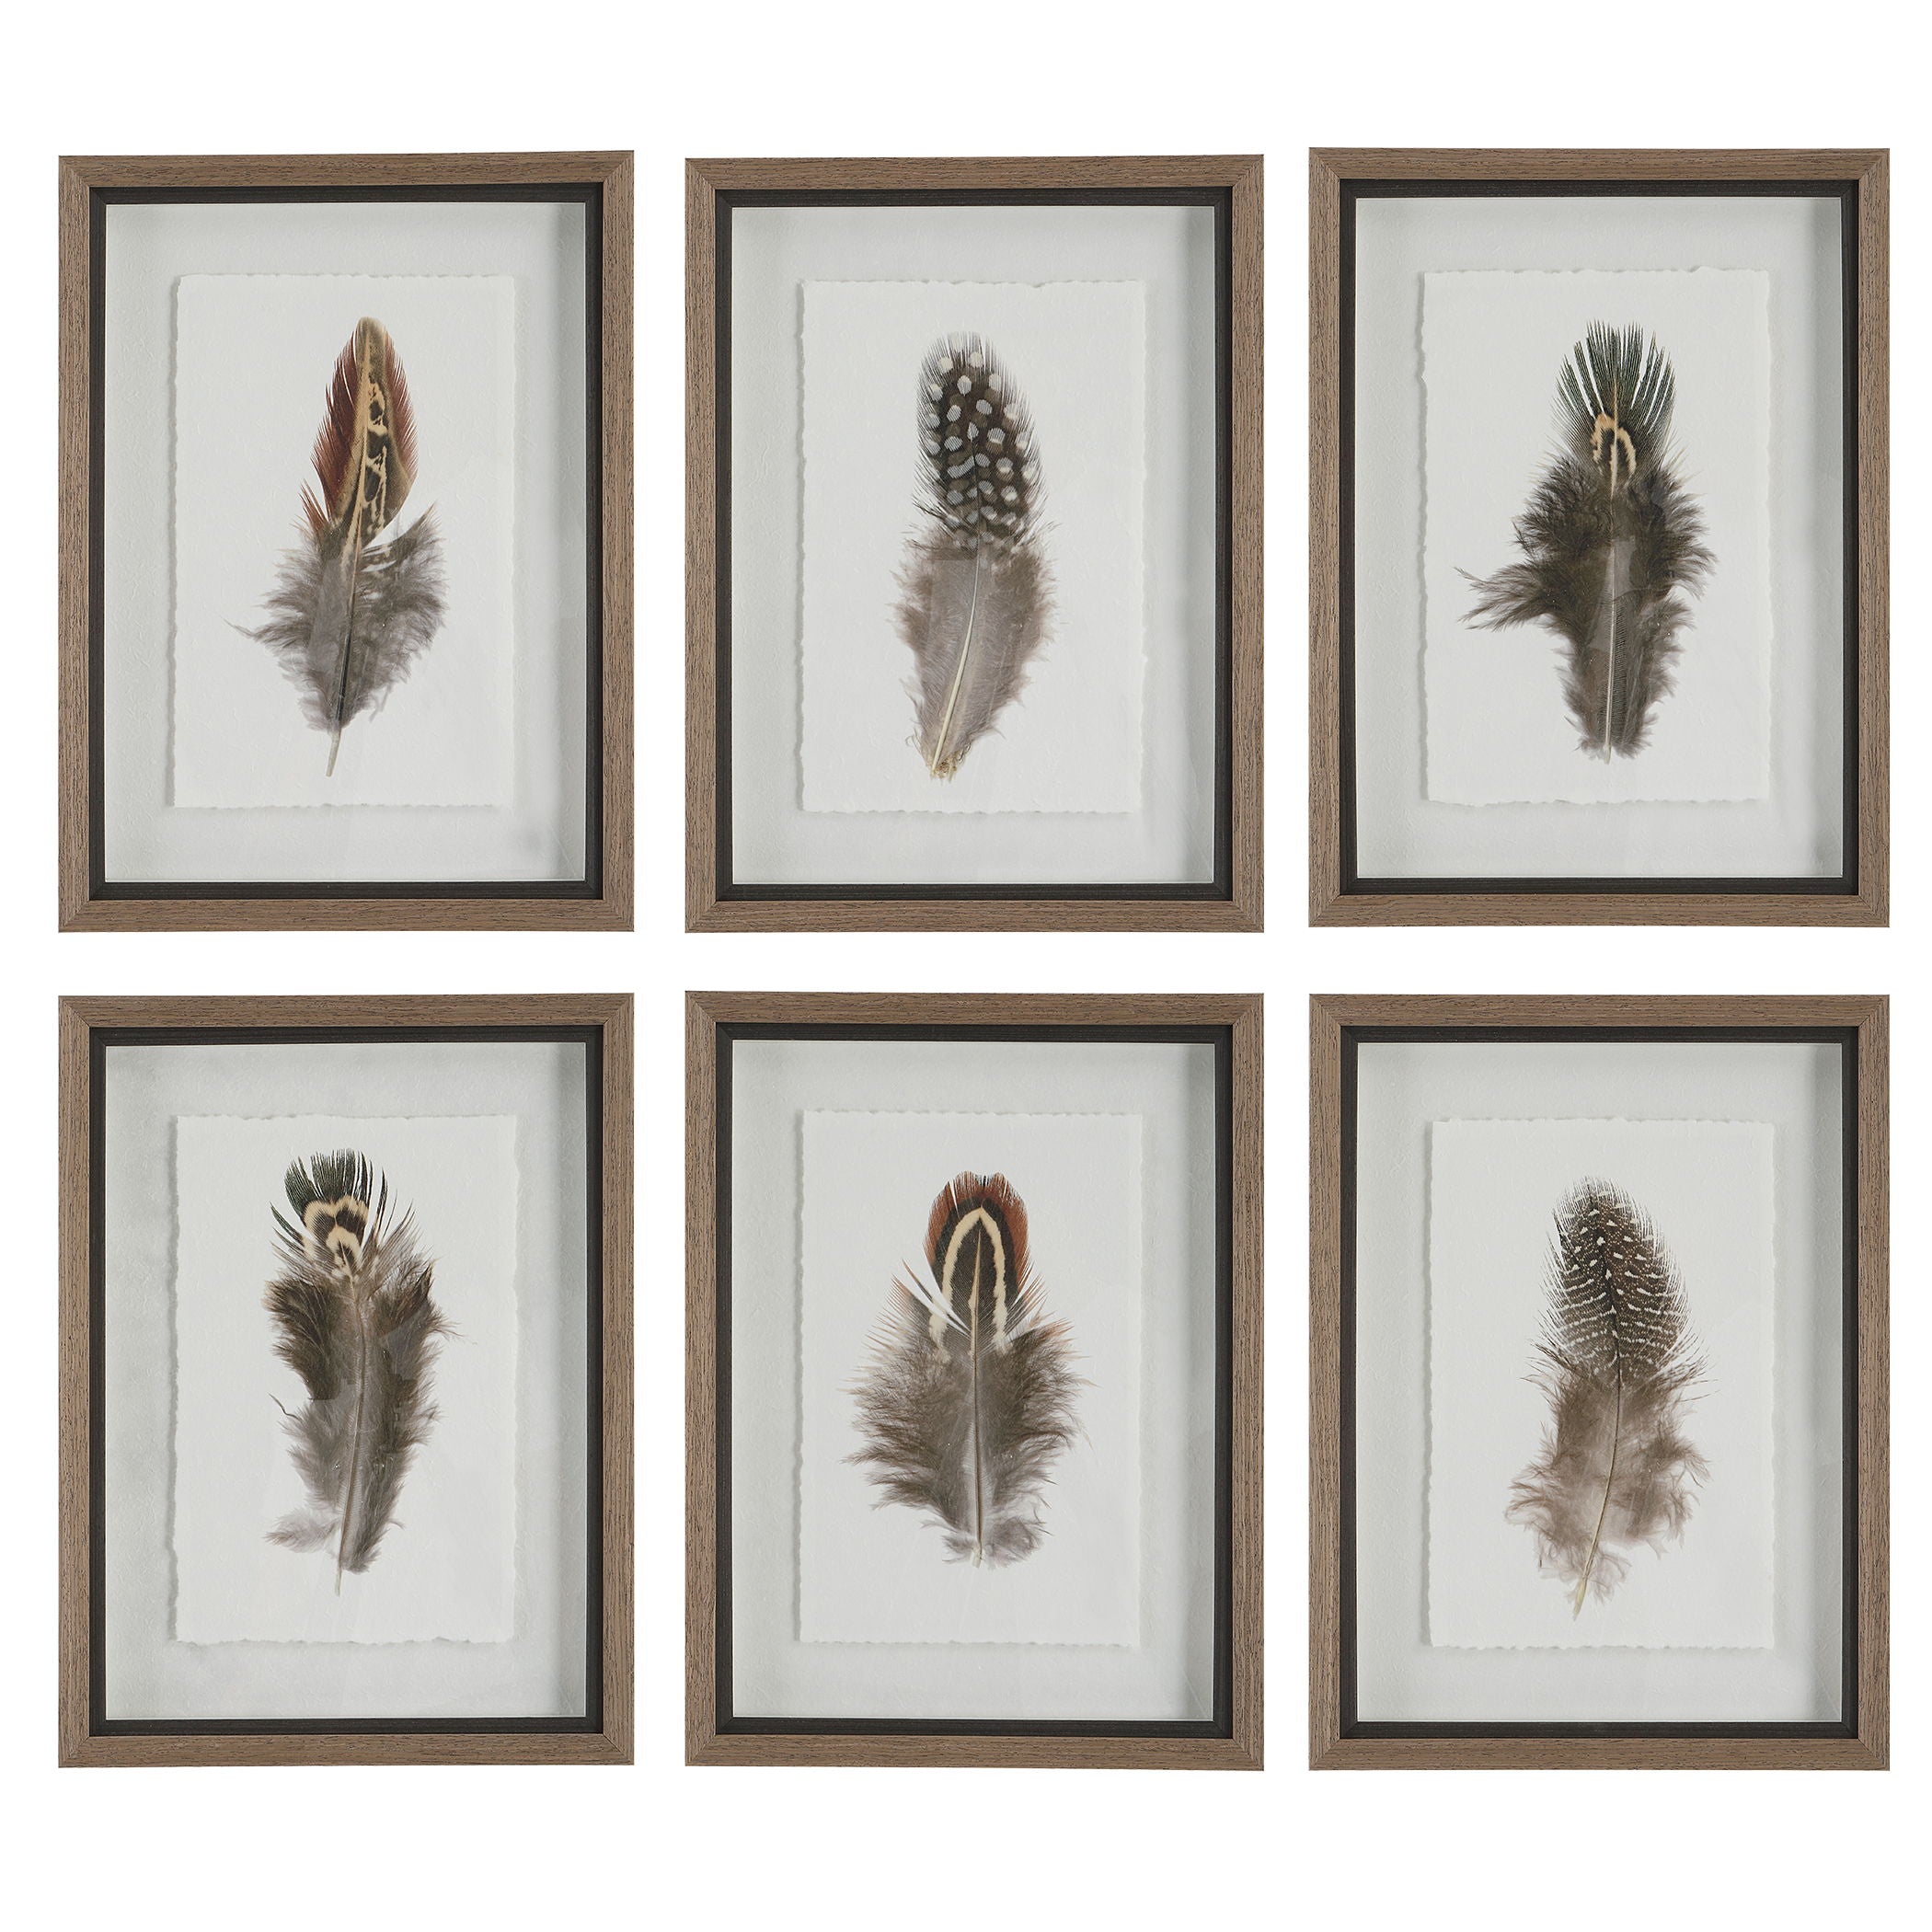 Birds Of A Feather - Framed Prints (Set of 6)